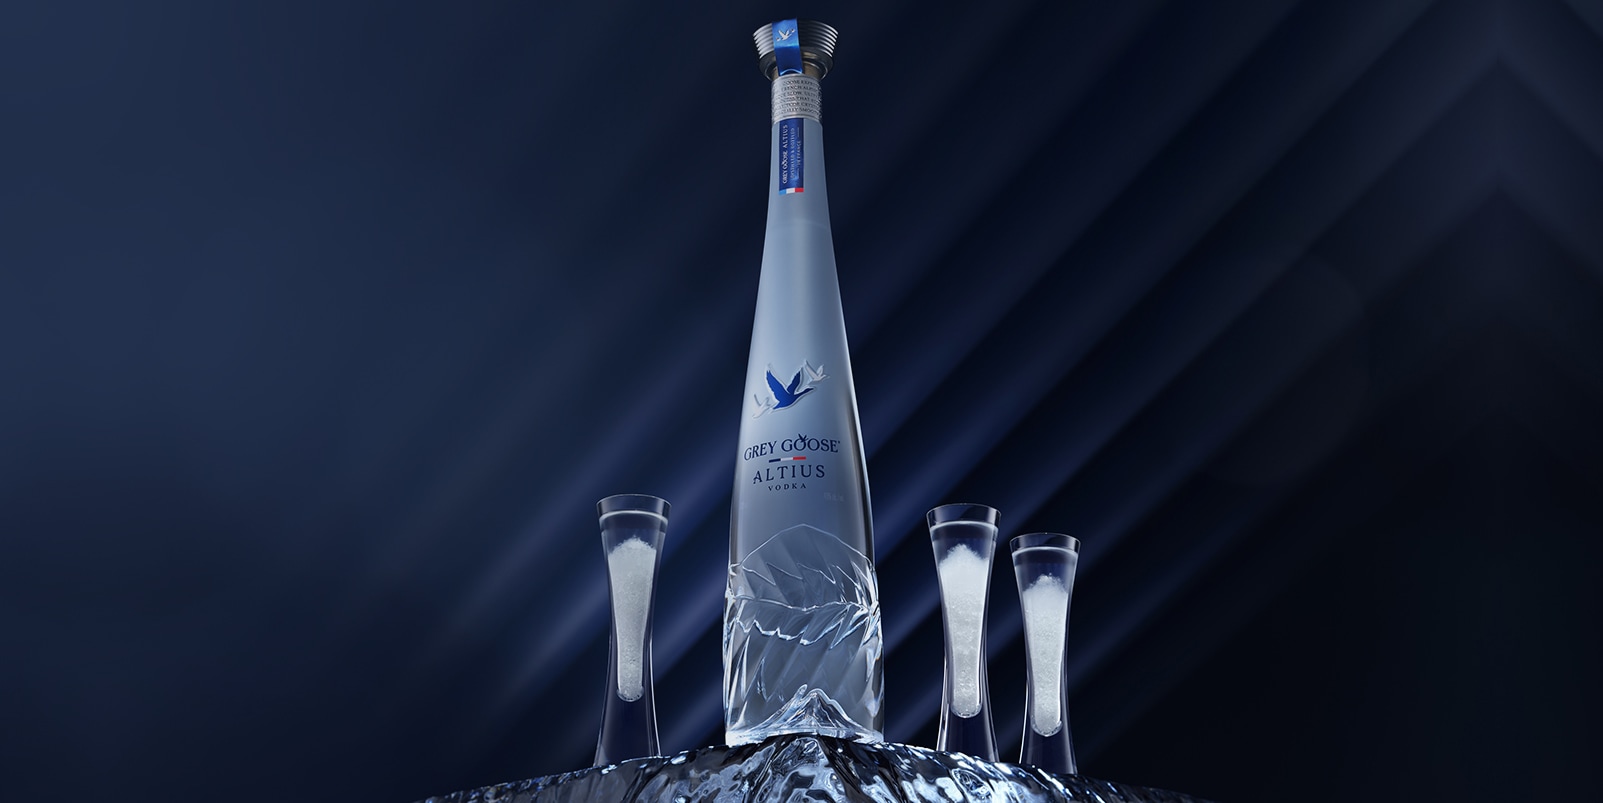 Where can you purchase GREY GOOSE® Altius?